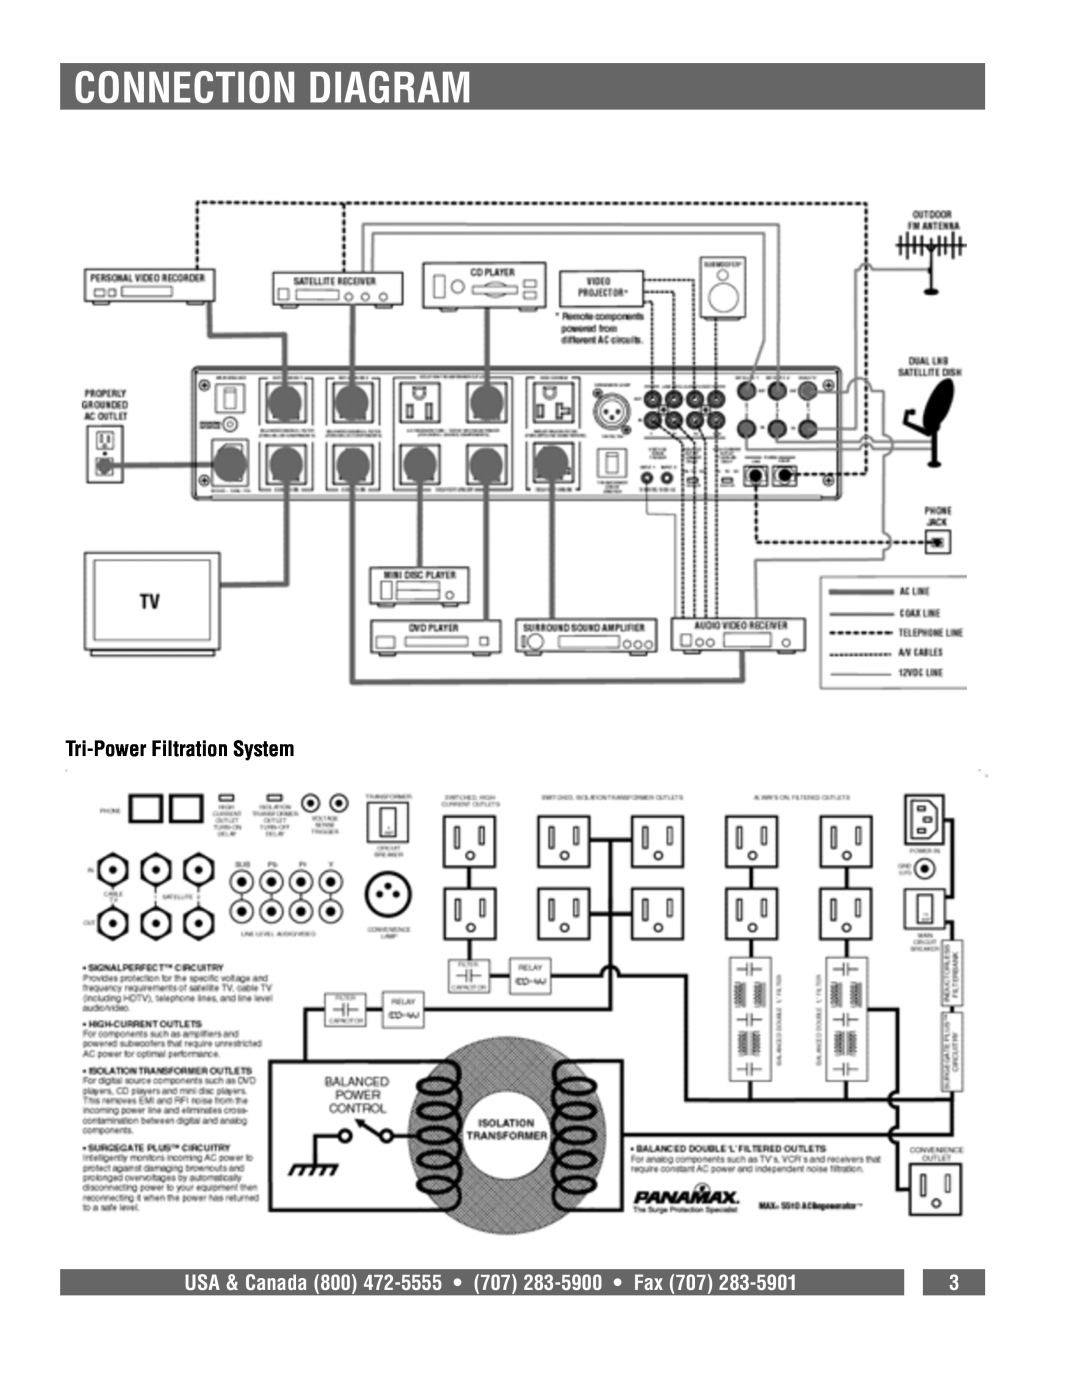 Panamax MAX 5510 Connection Diagram, Tri-Power Filtration System, USA & Canada 800 472-5555 707 283-5900 Fax 707 